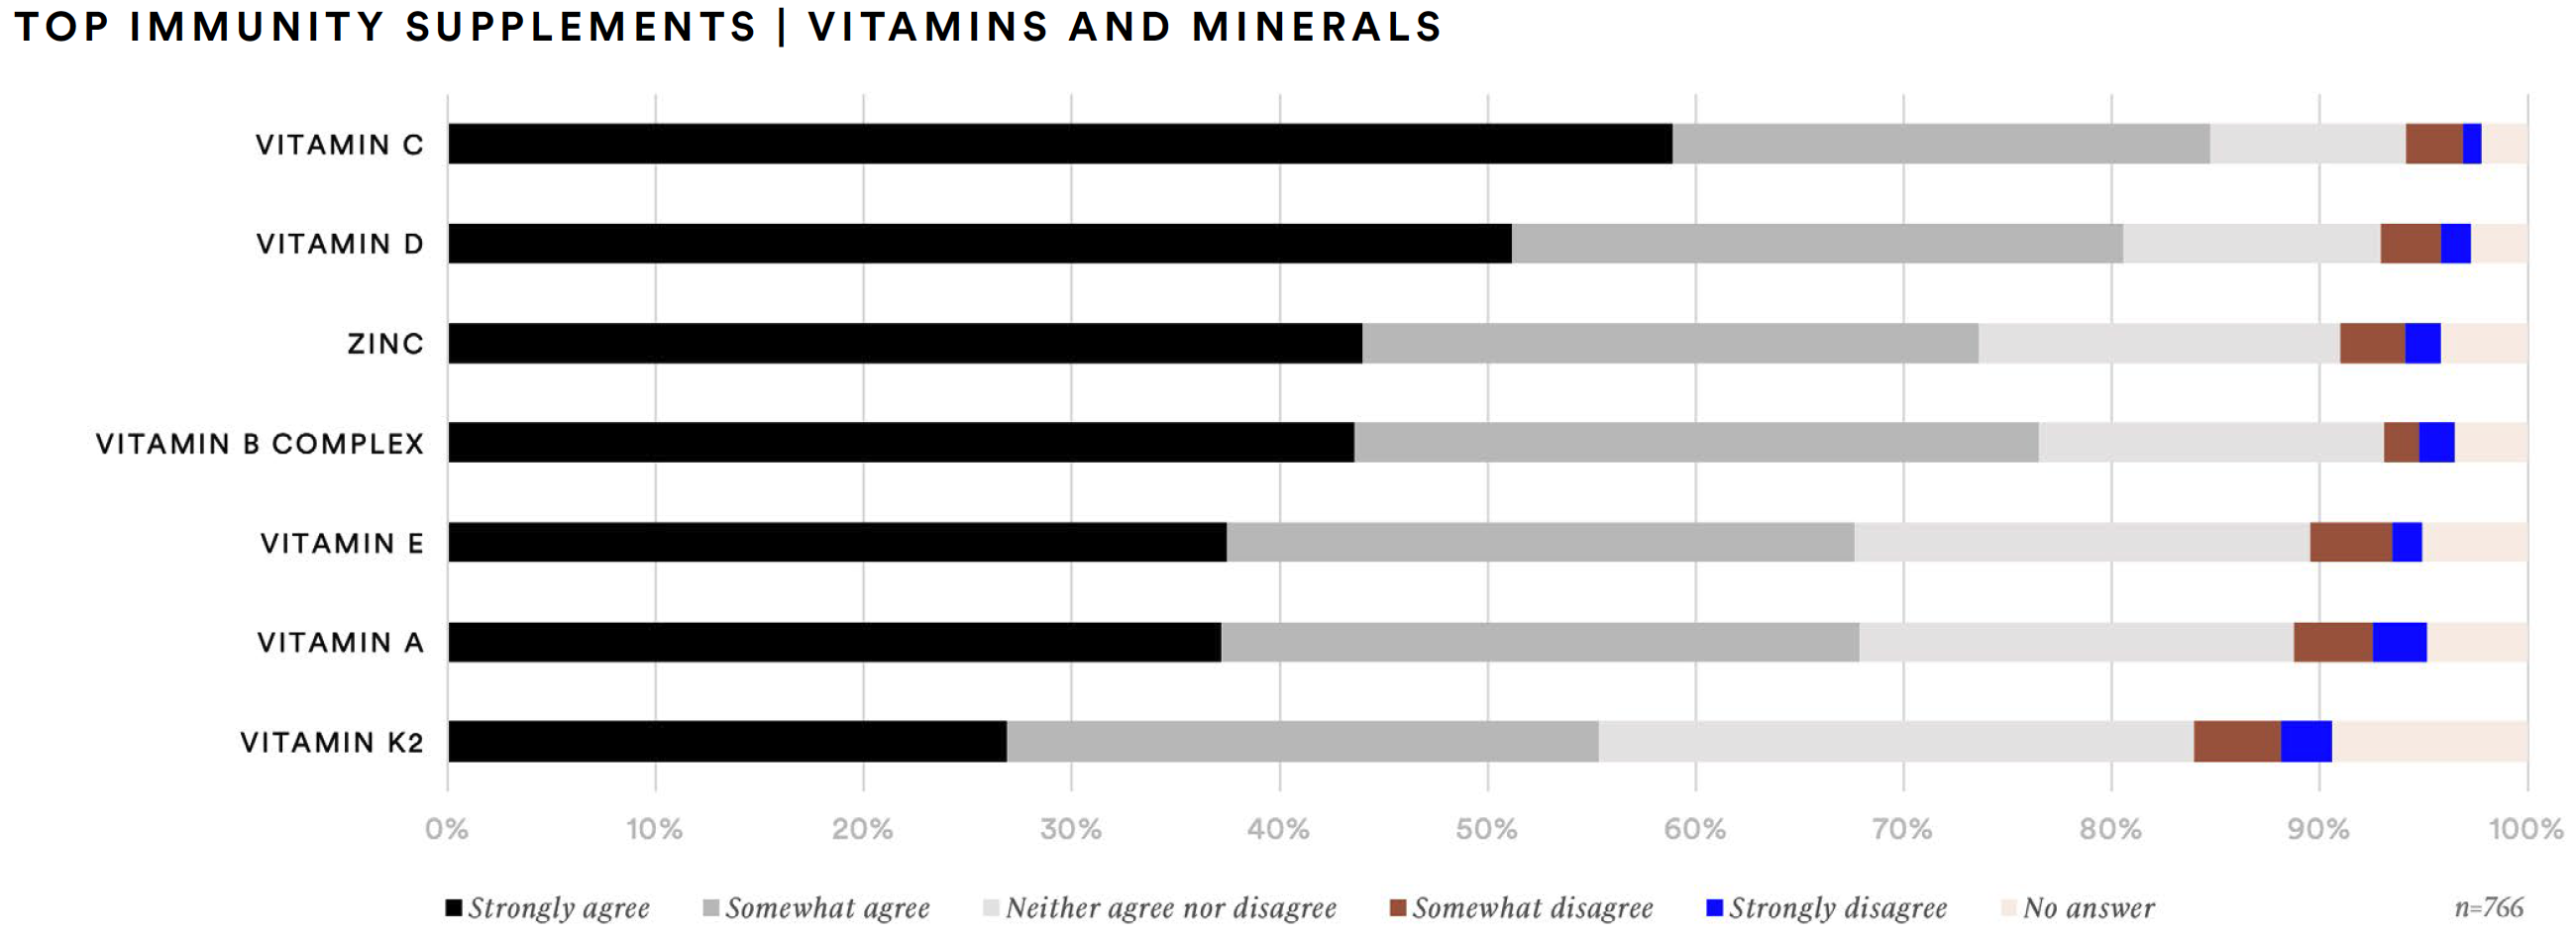 top immunity supplements (vitamins and minerals) table